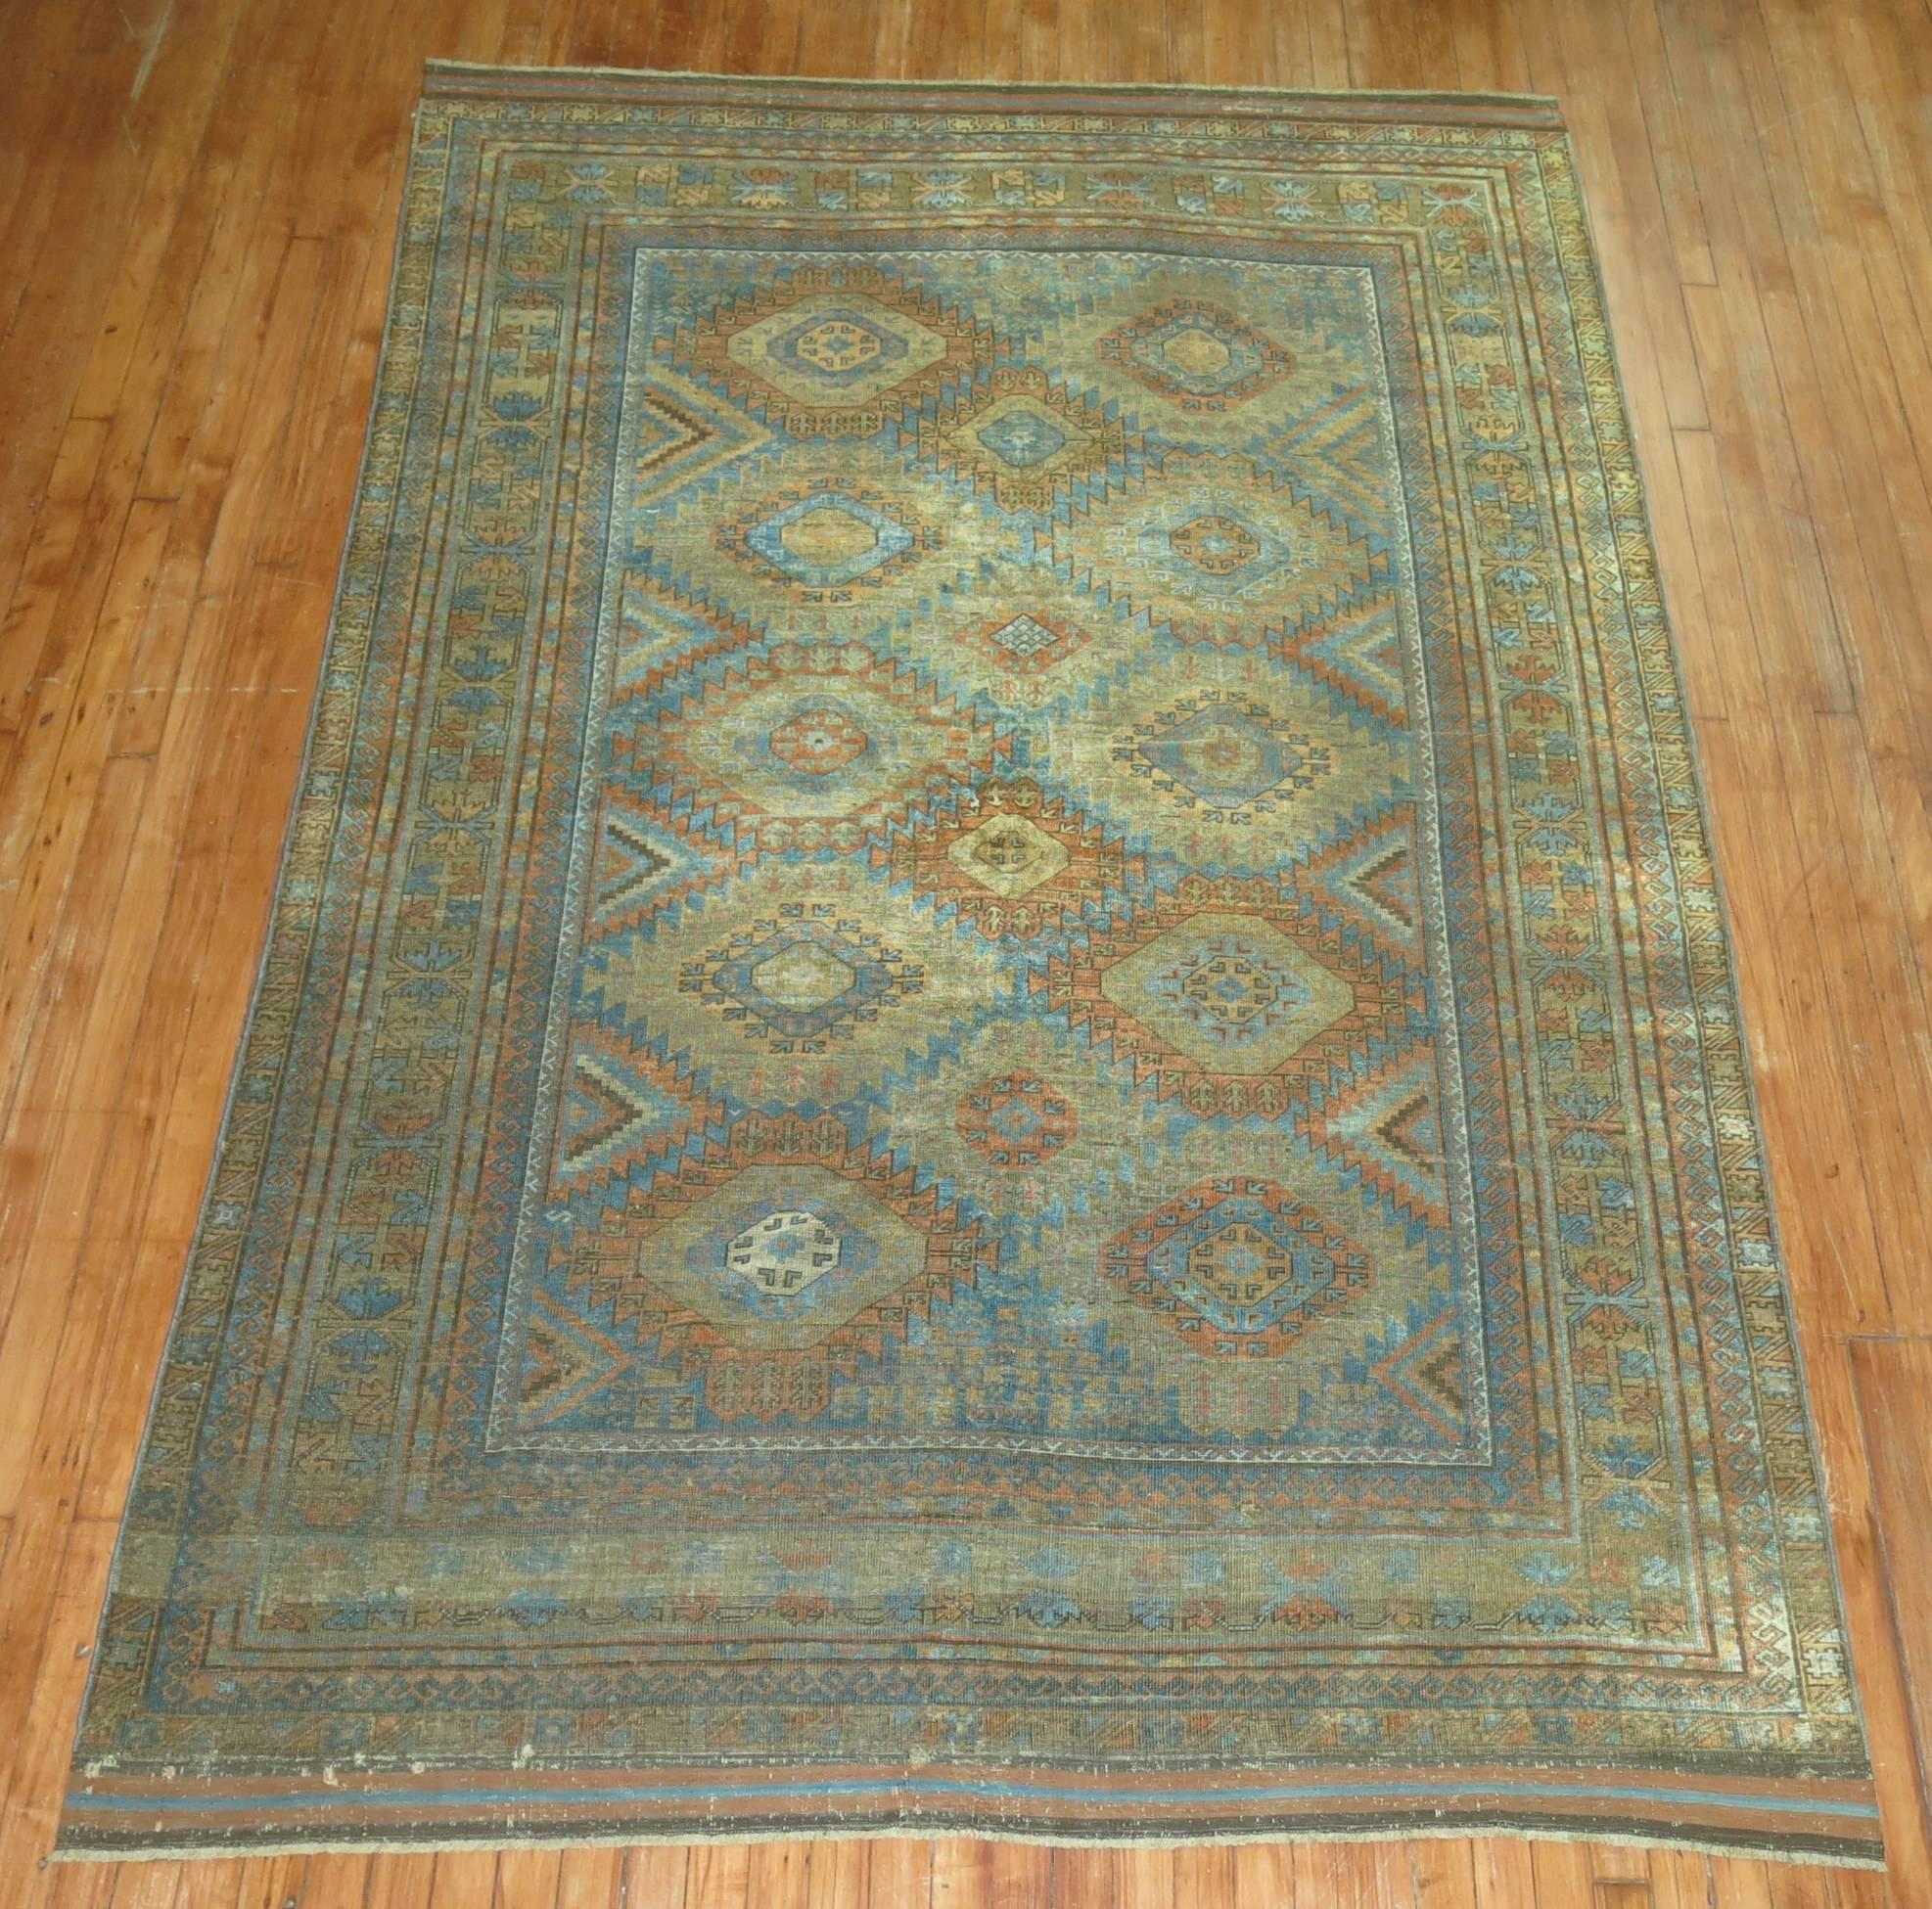 An early 20th century rustic color Afghan Balouch (Baluchi) carpet. All-over geometric design in browns, terracotta, and copper accents on a blue ground

Measures: 5'9